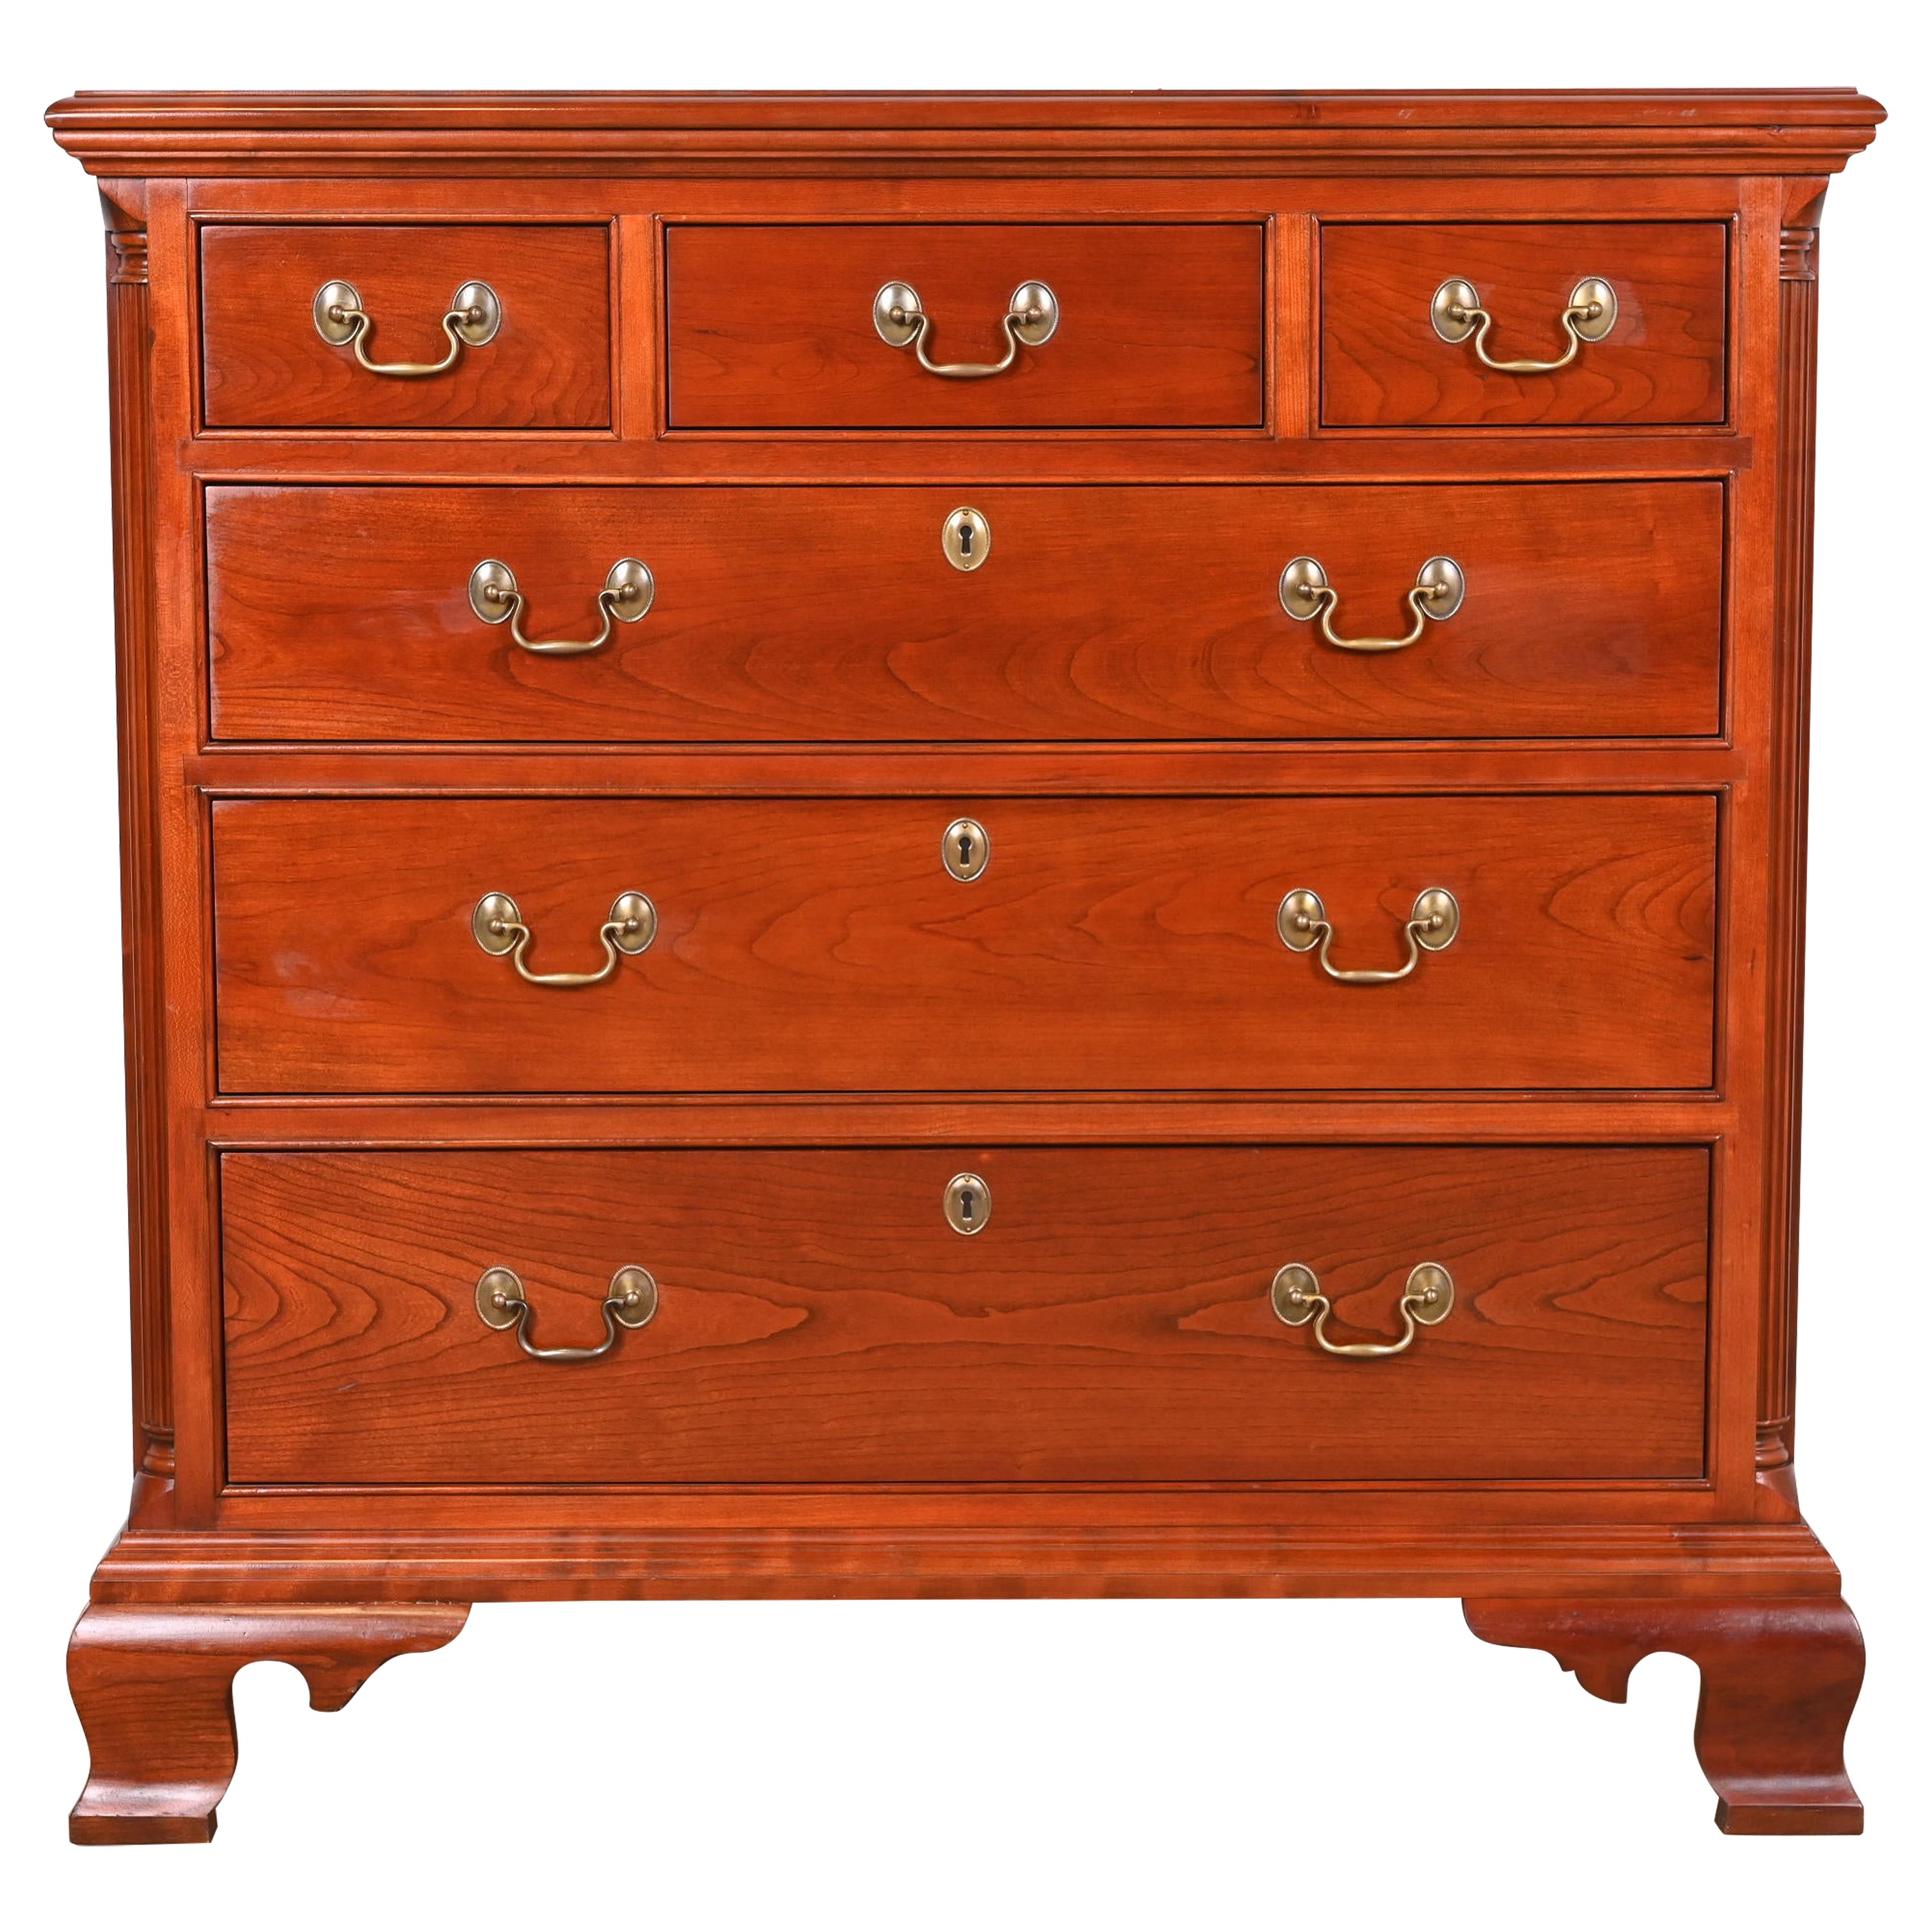 Stickley Georgian Solid Cherry Wood Six-Drawer Chest of Drawers